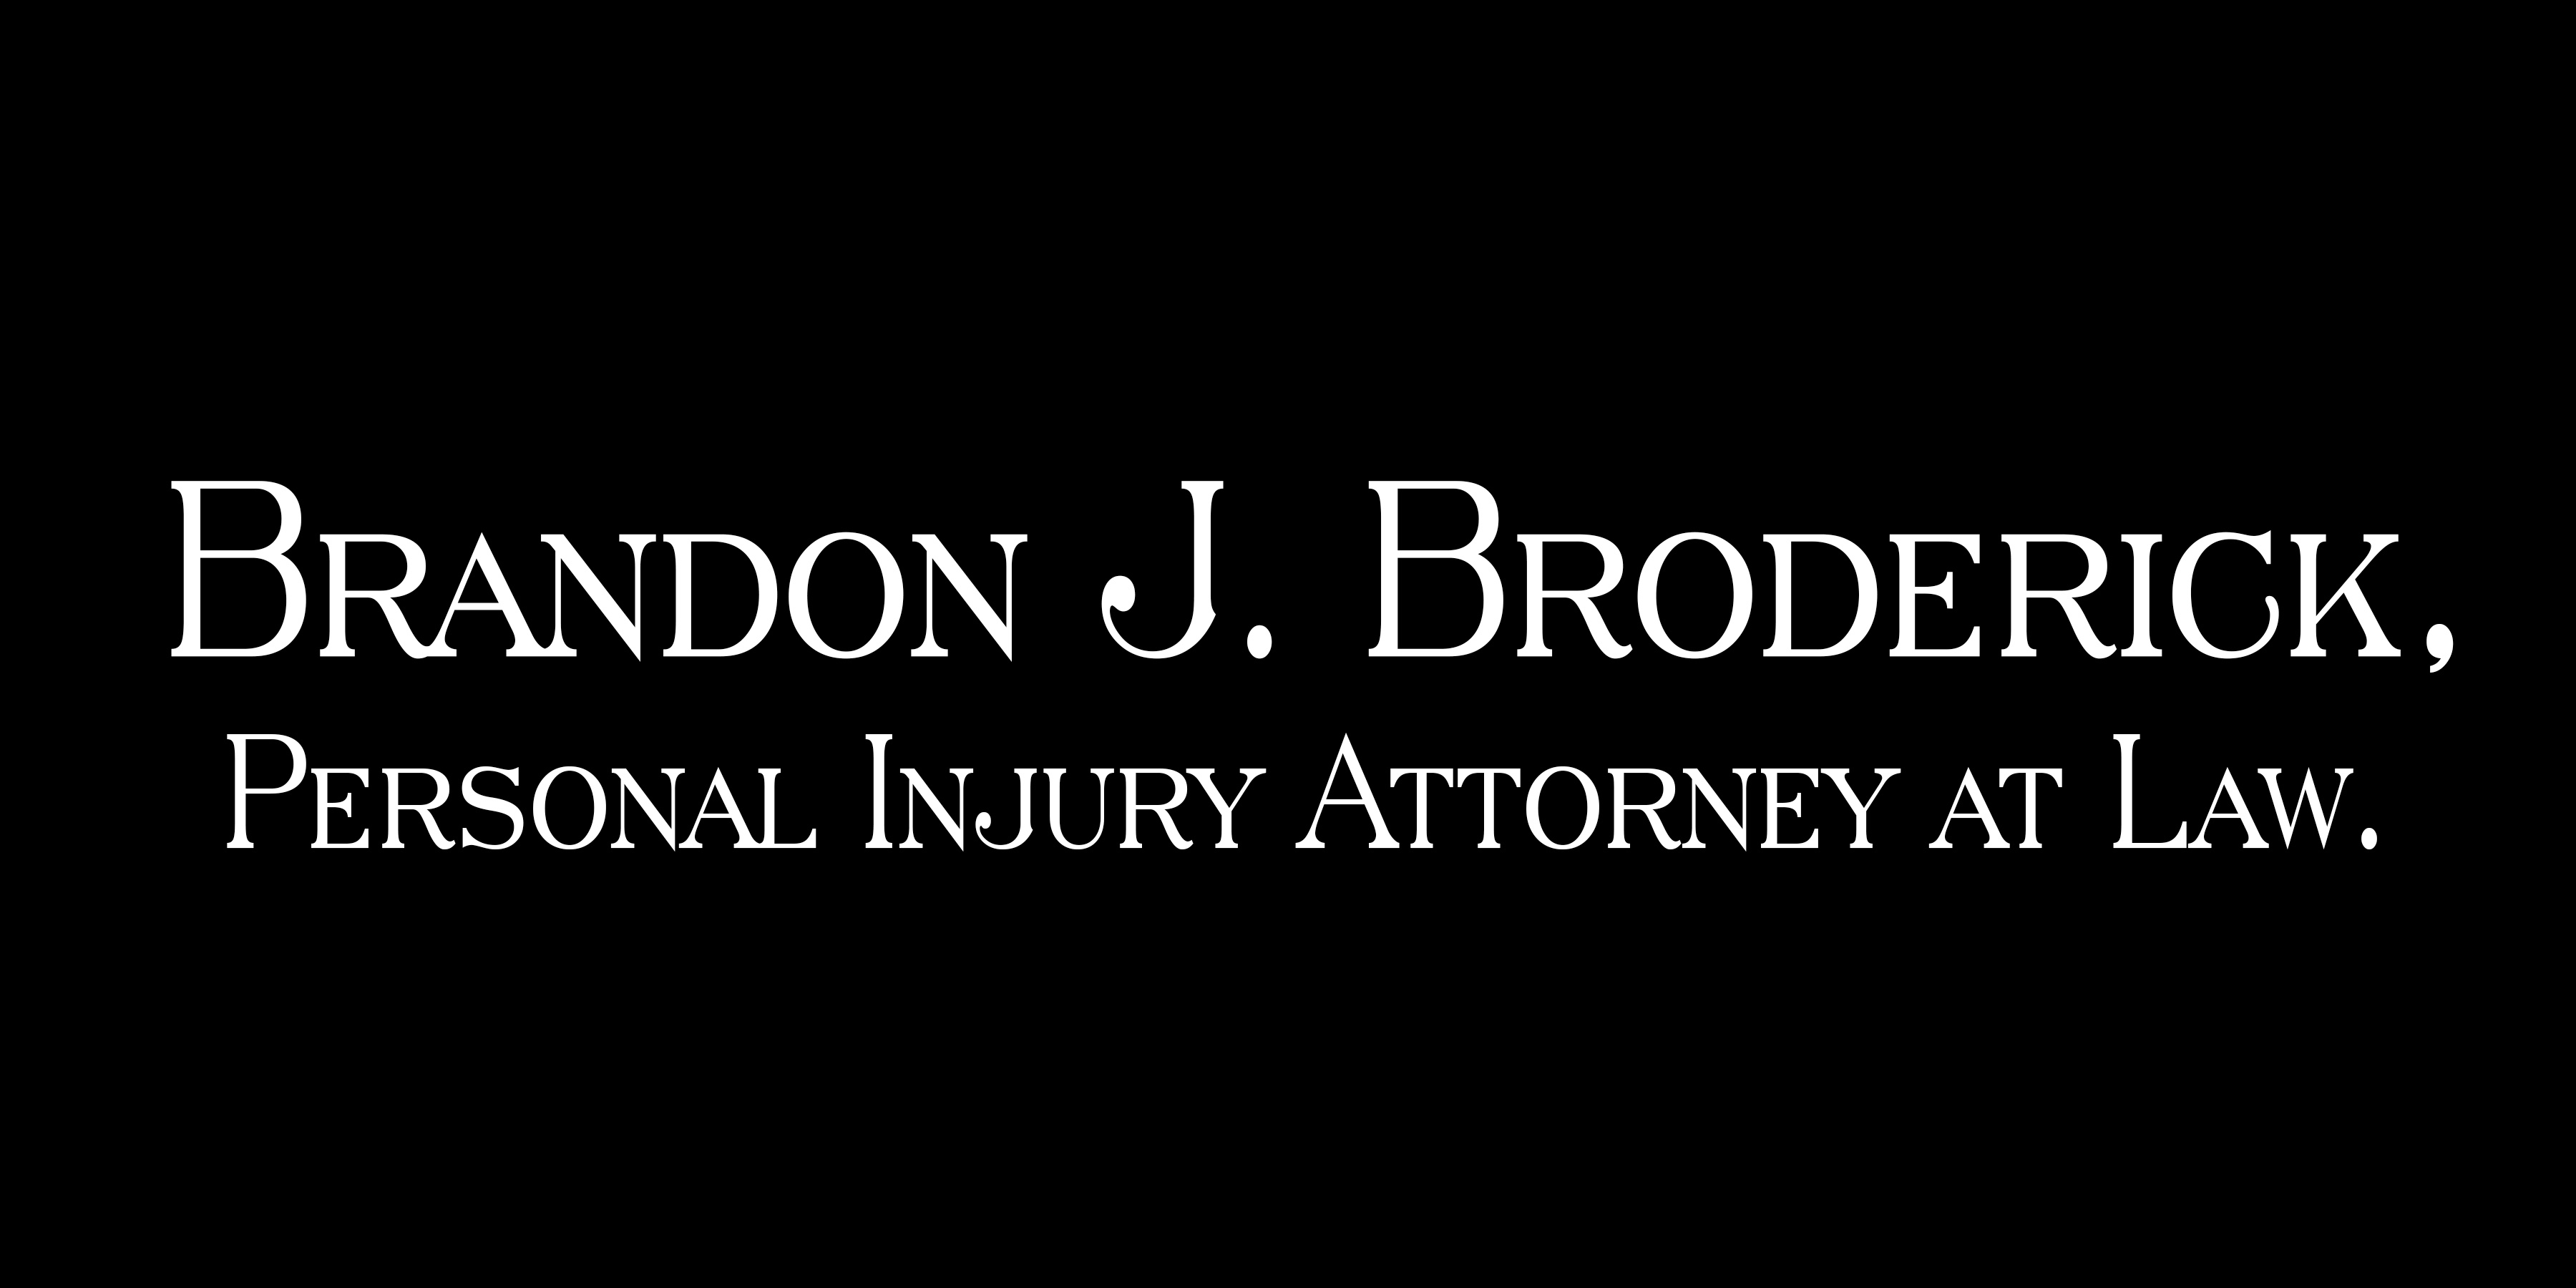 Brandon J. Broderick, Personal Injury Attorney at Law Profile Picture